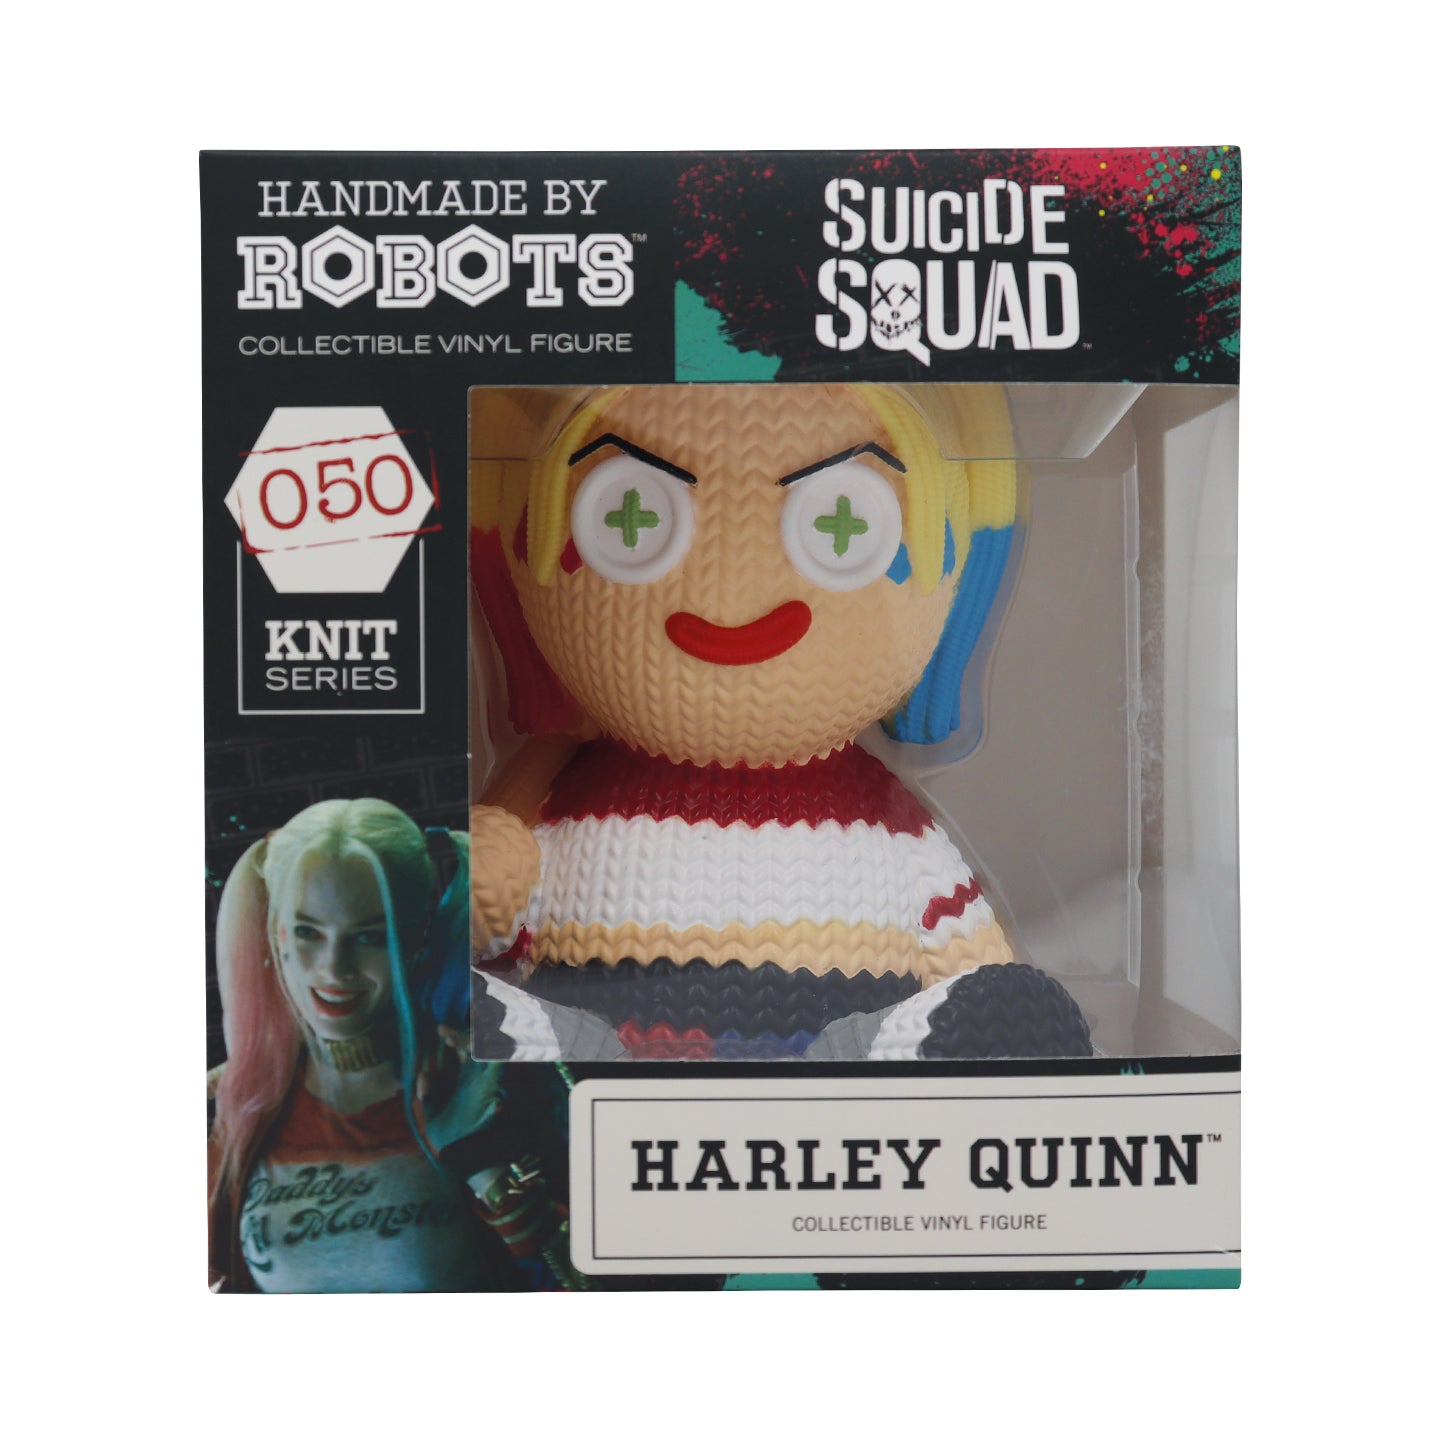 DC - Harley Quinn Collectible Vinyl Figure from Handmade By Robots